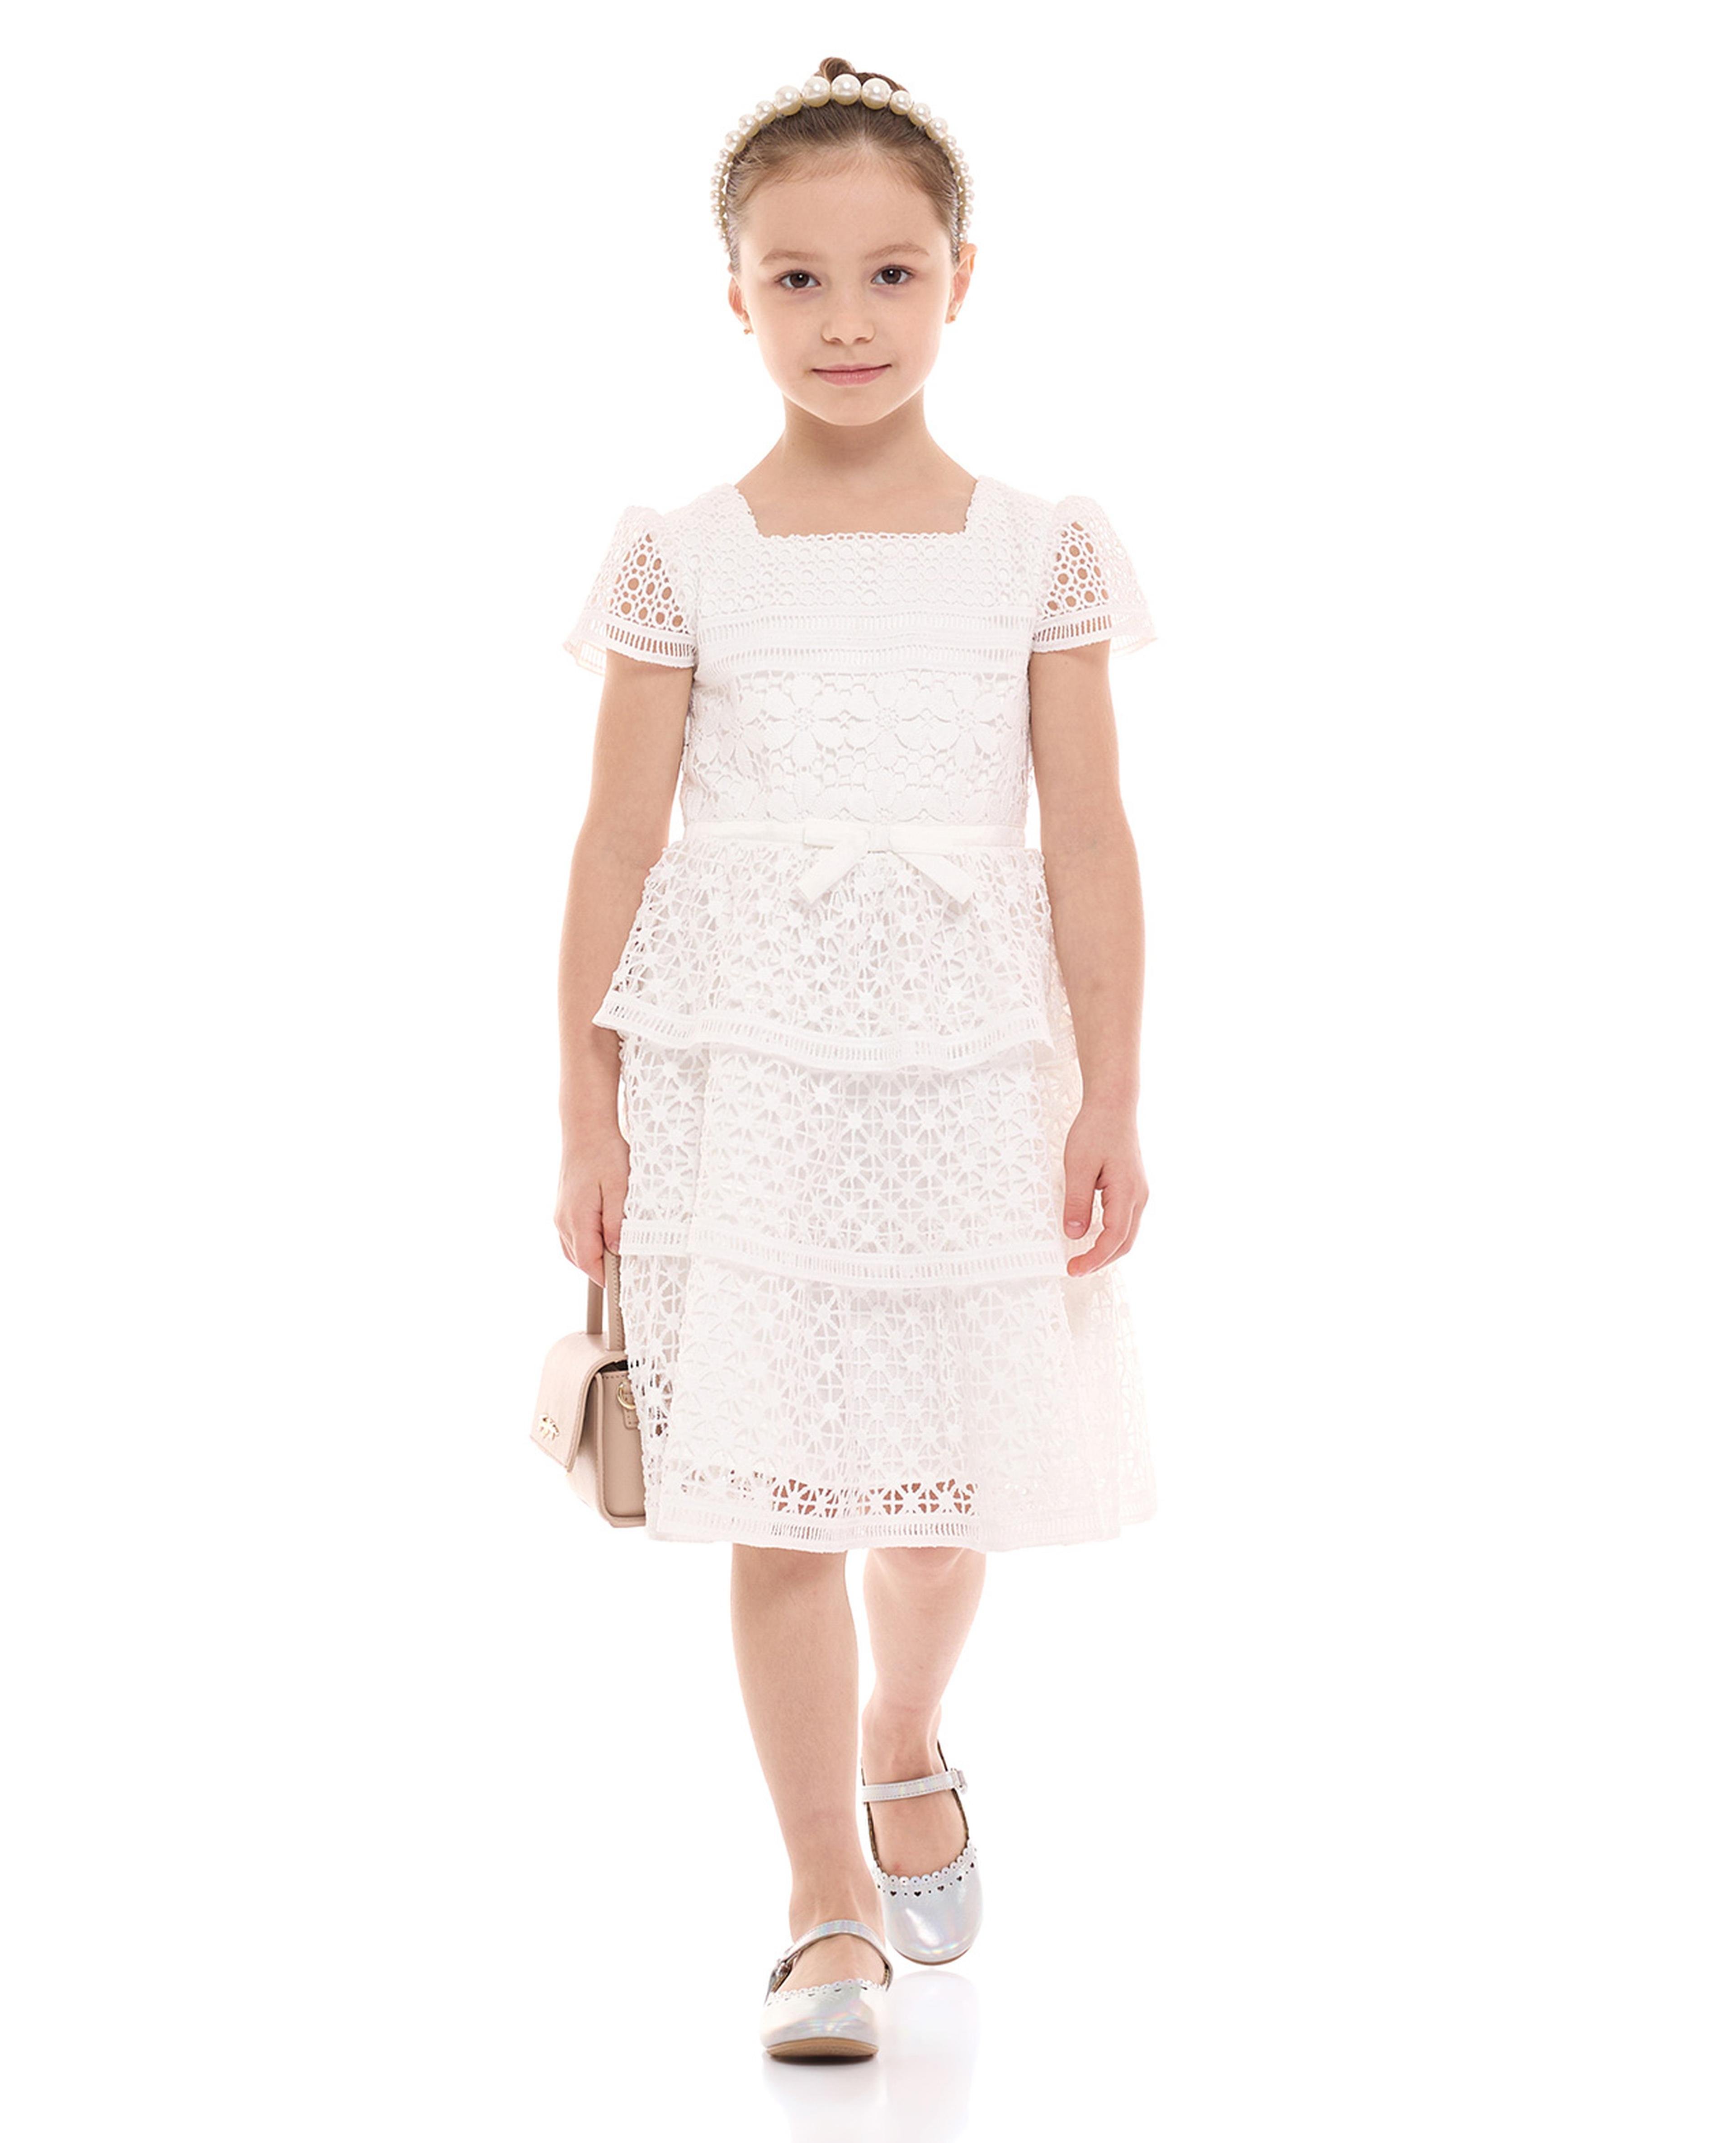 Lace Tiered Dress with Square Neck and Short Sleeves